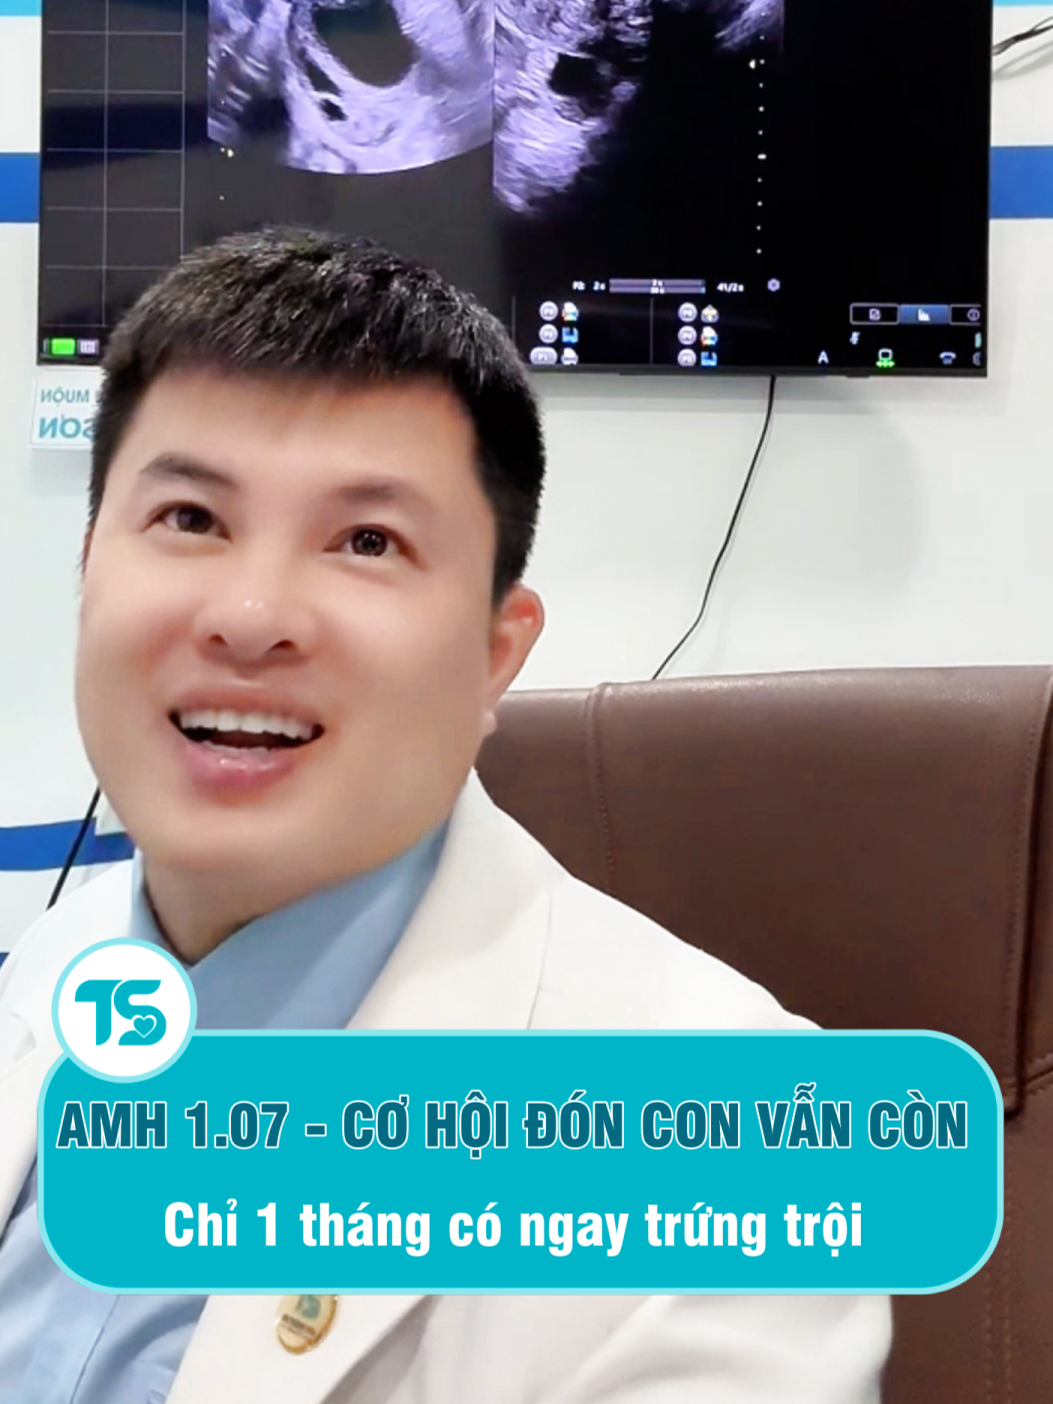 AMH 0.2, uống thuốc 1 tháng có ngay trứng trội 😍😍 #bacsithanhson #drts #drthanhson #amhthap #suybuongtrung #doncon #mongcon #hiemmuon #LearnOnTikTok #fyp